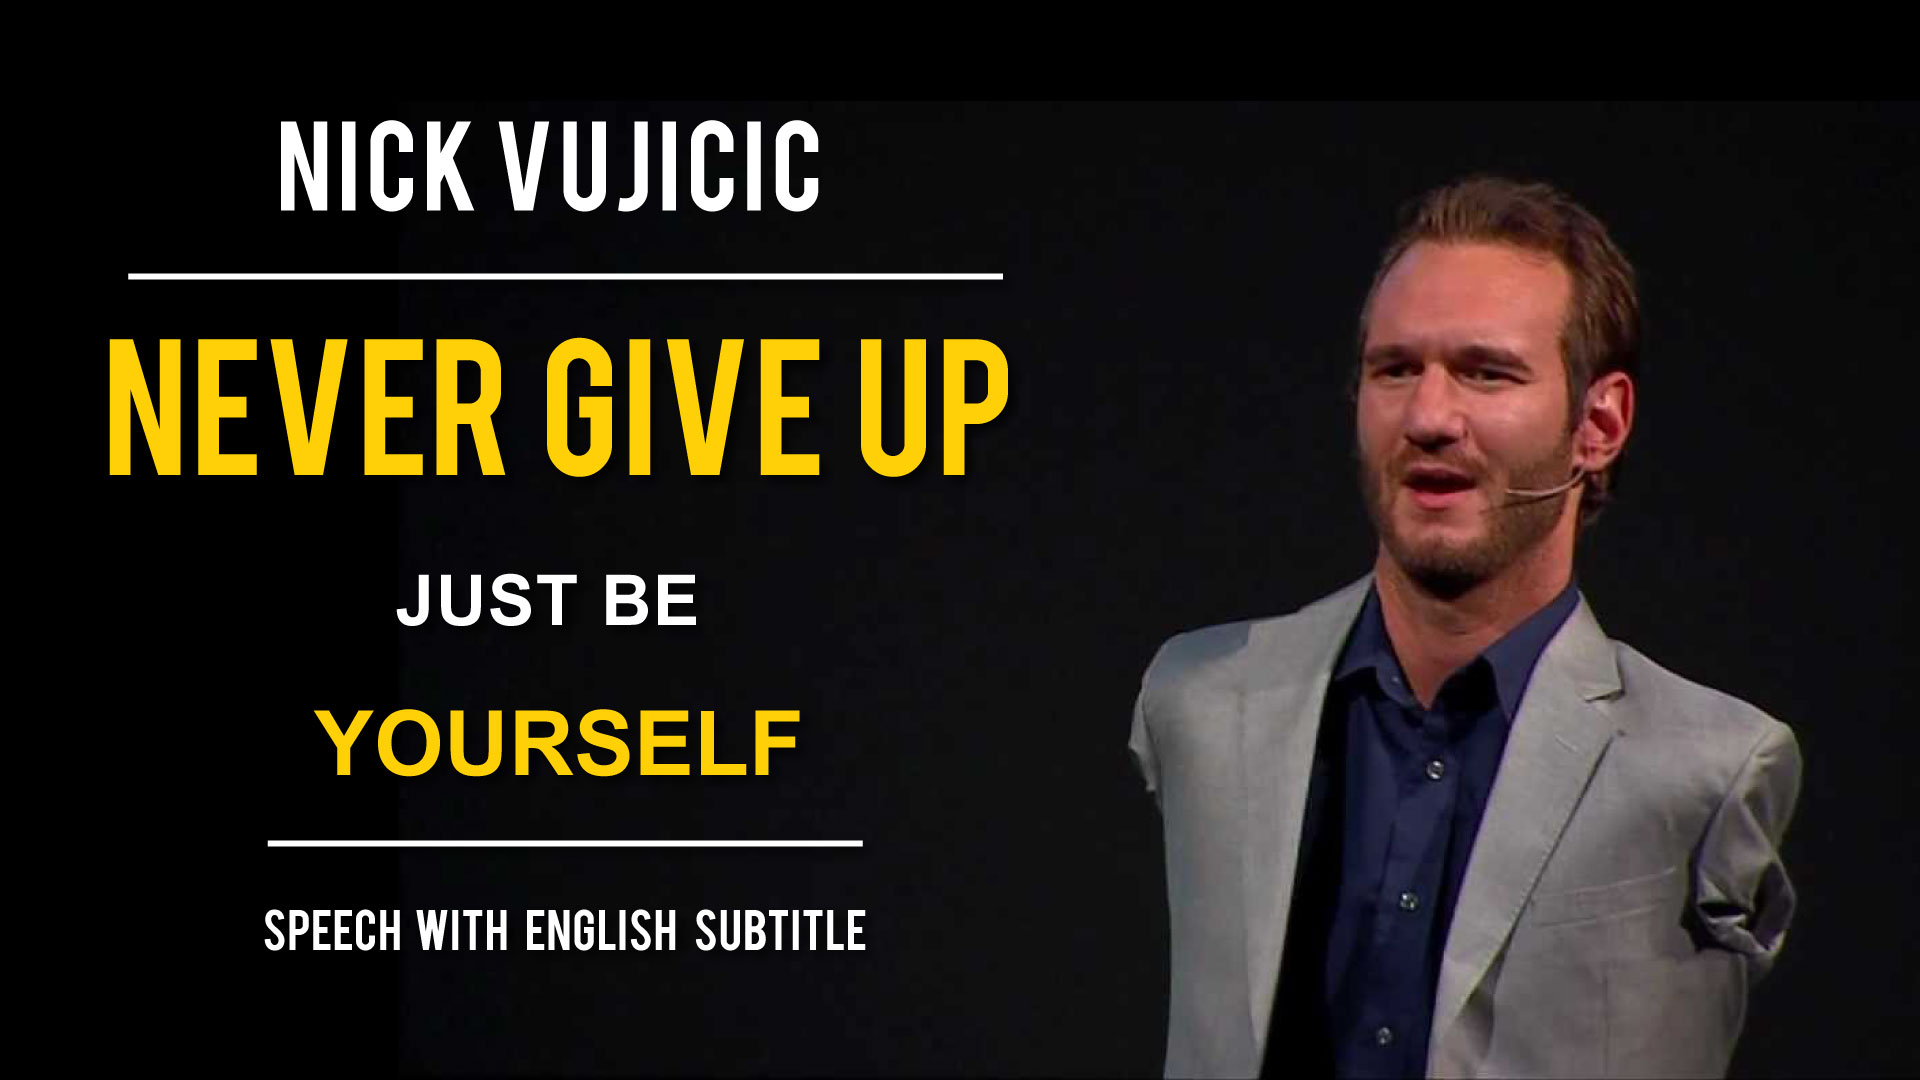 Life Changing Speech by Nick Vujicic Corporate Valley 1920x1080